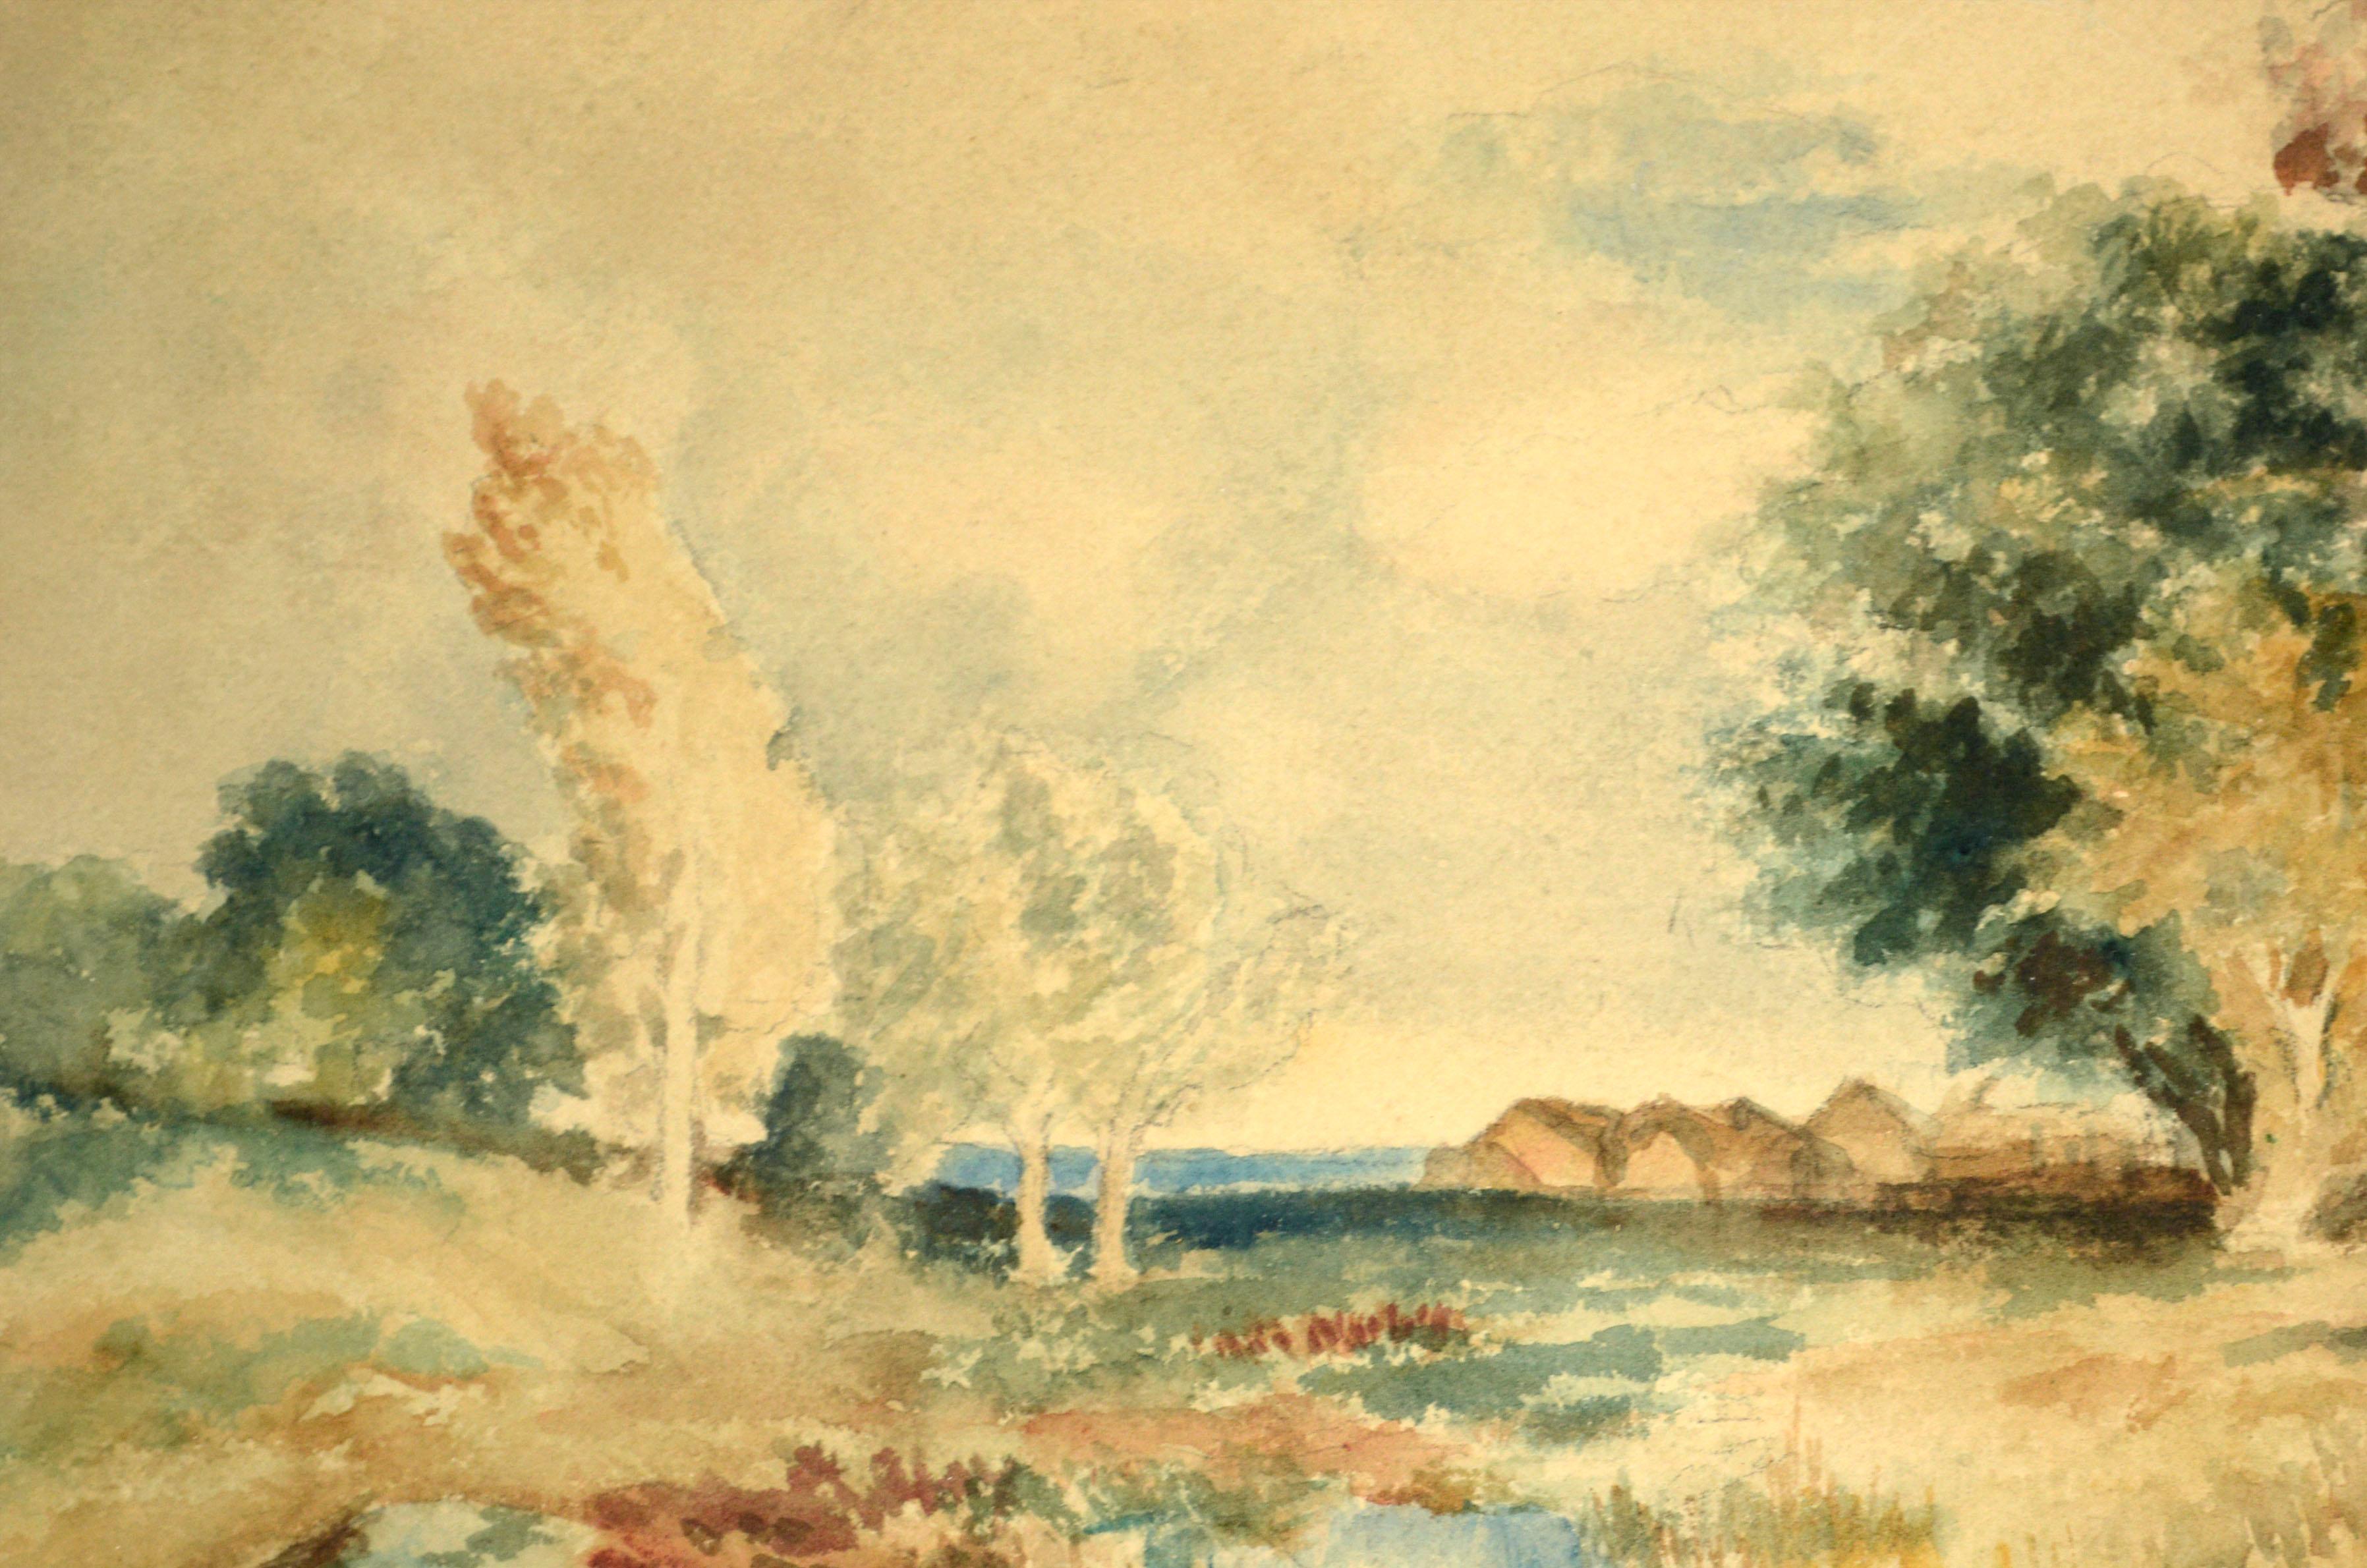 Early 20th Century Autumn Landscape Watercolor  - American Impressionist Art by E. Camren